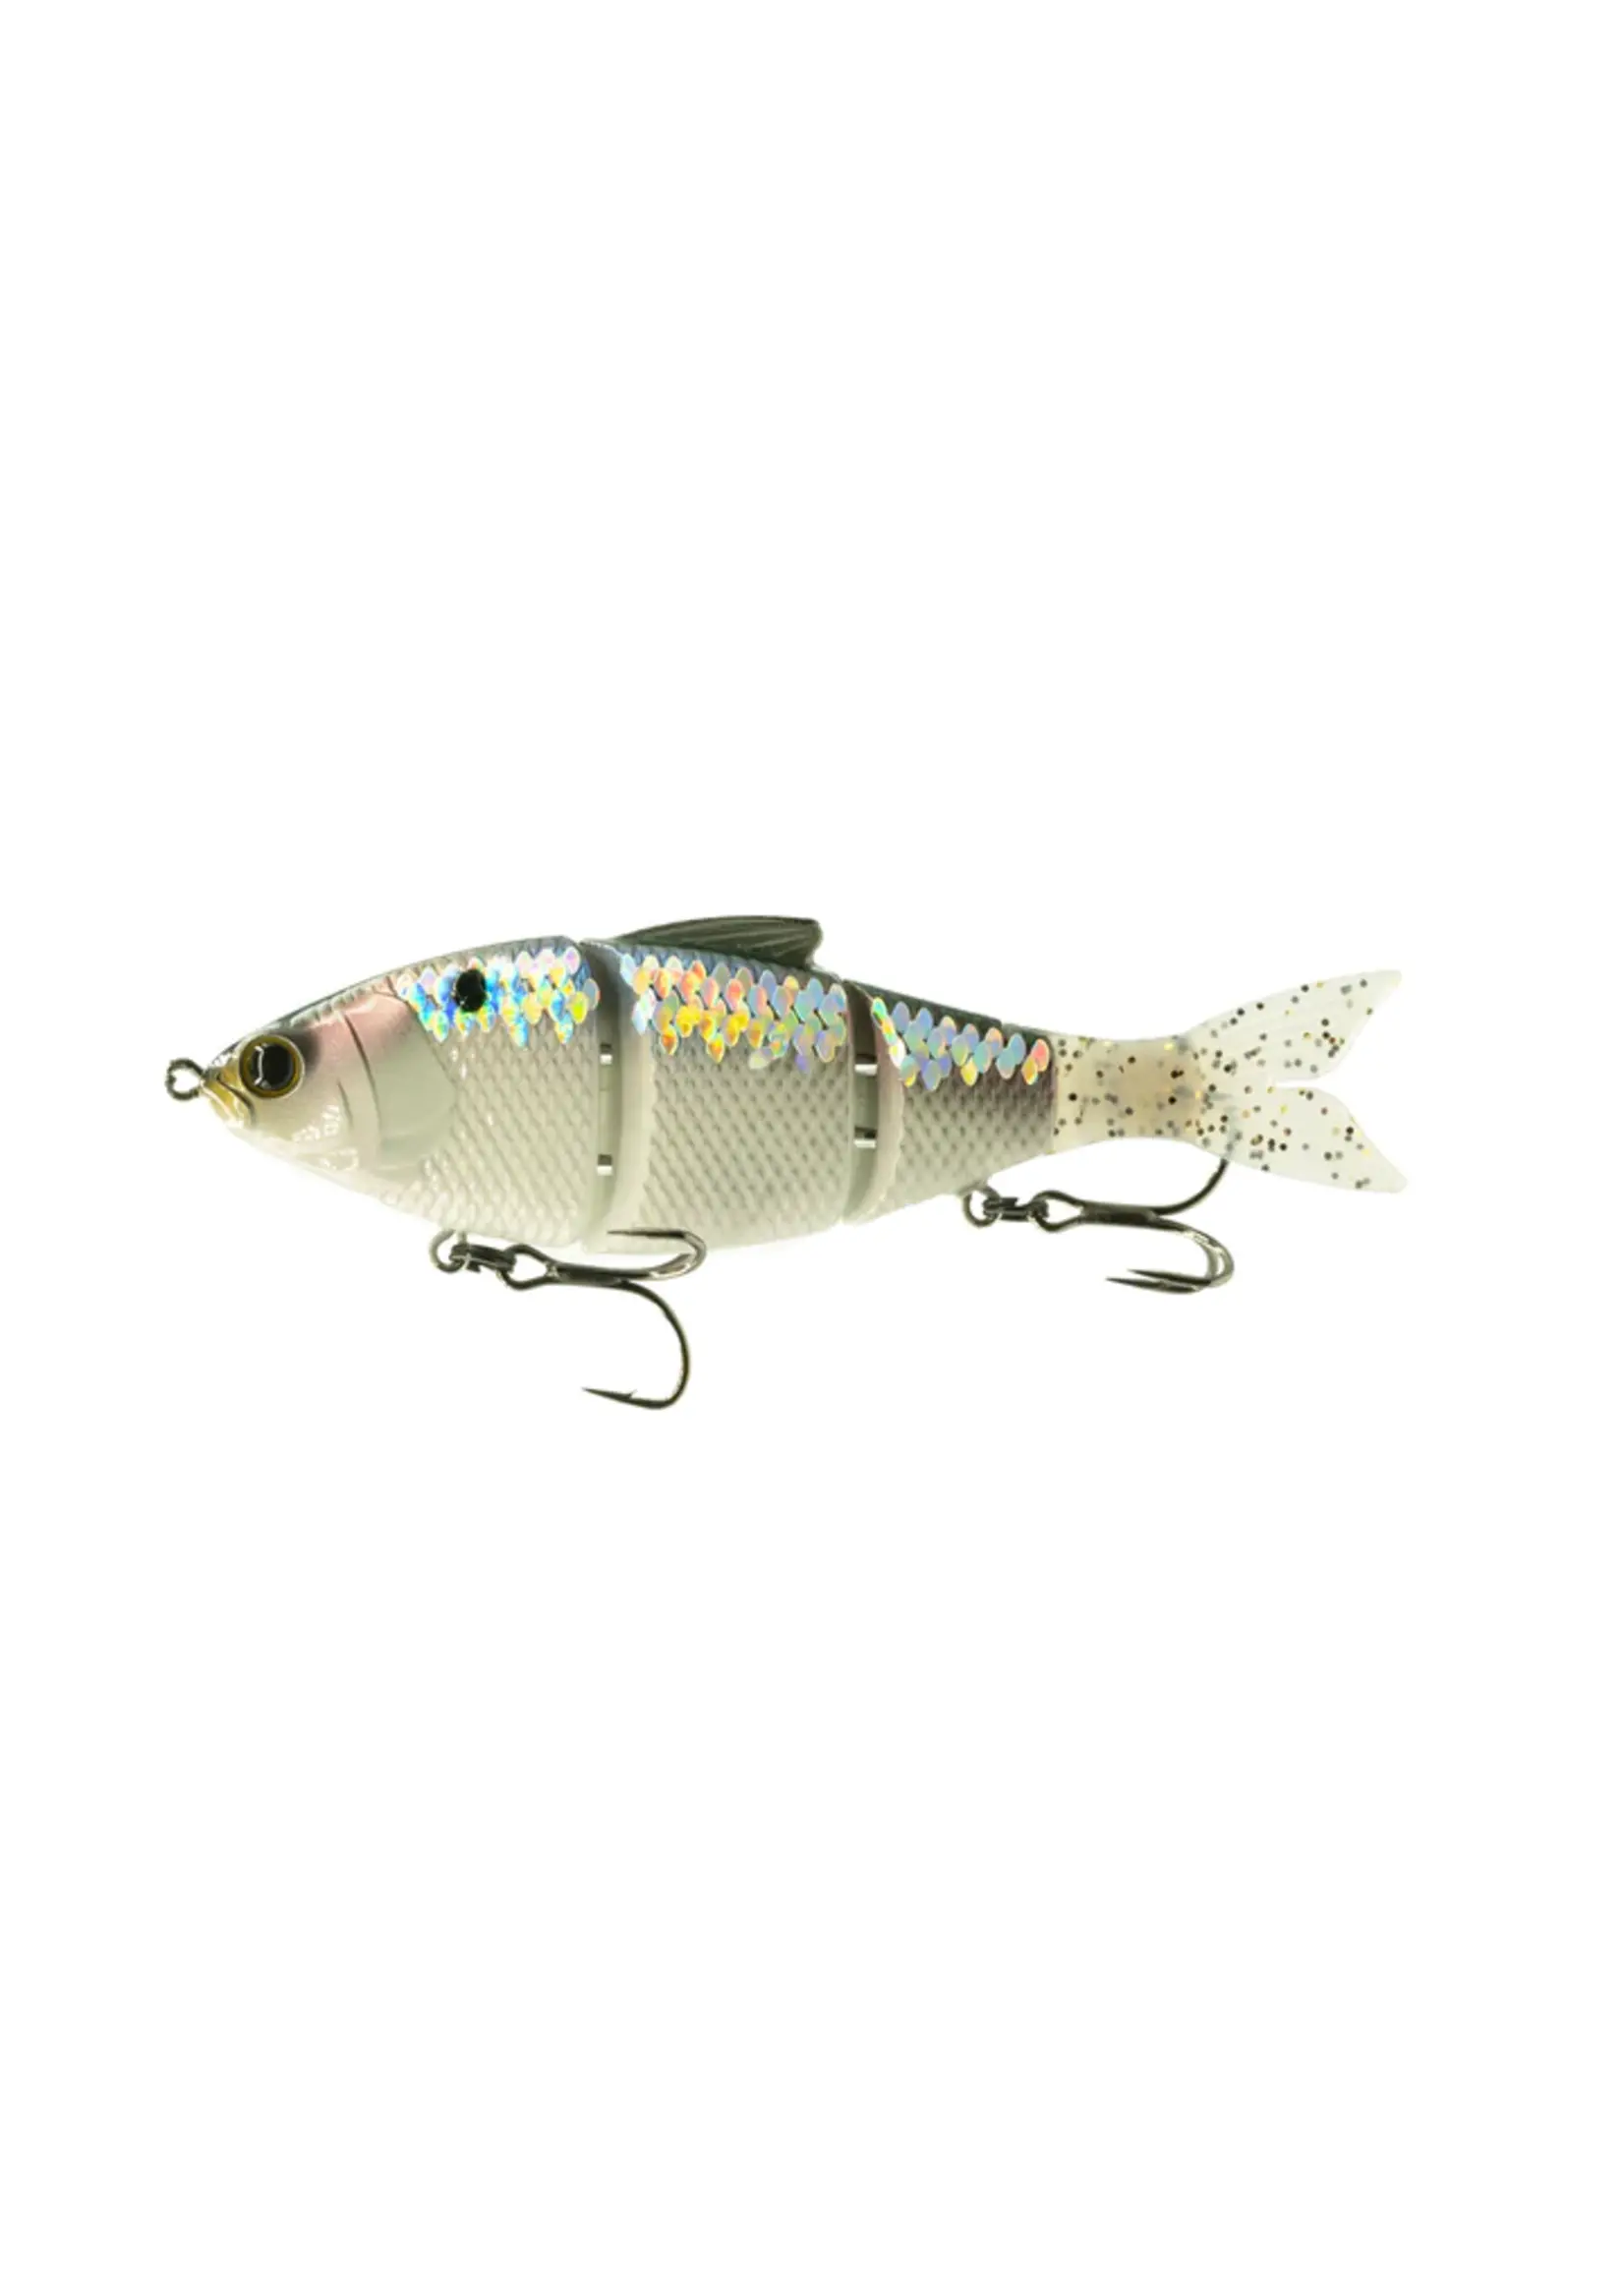 6th Sense Trace 5 Swimbait - Shad Scales Slow Sink - Brothers Outdoors LLC